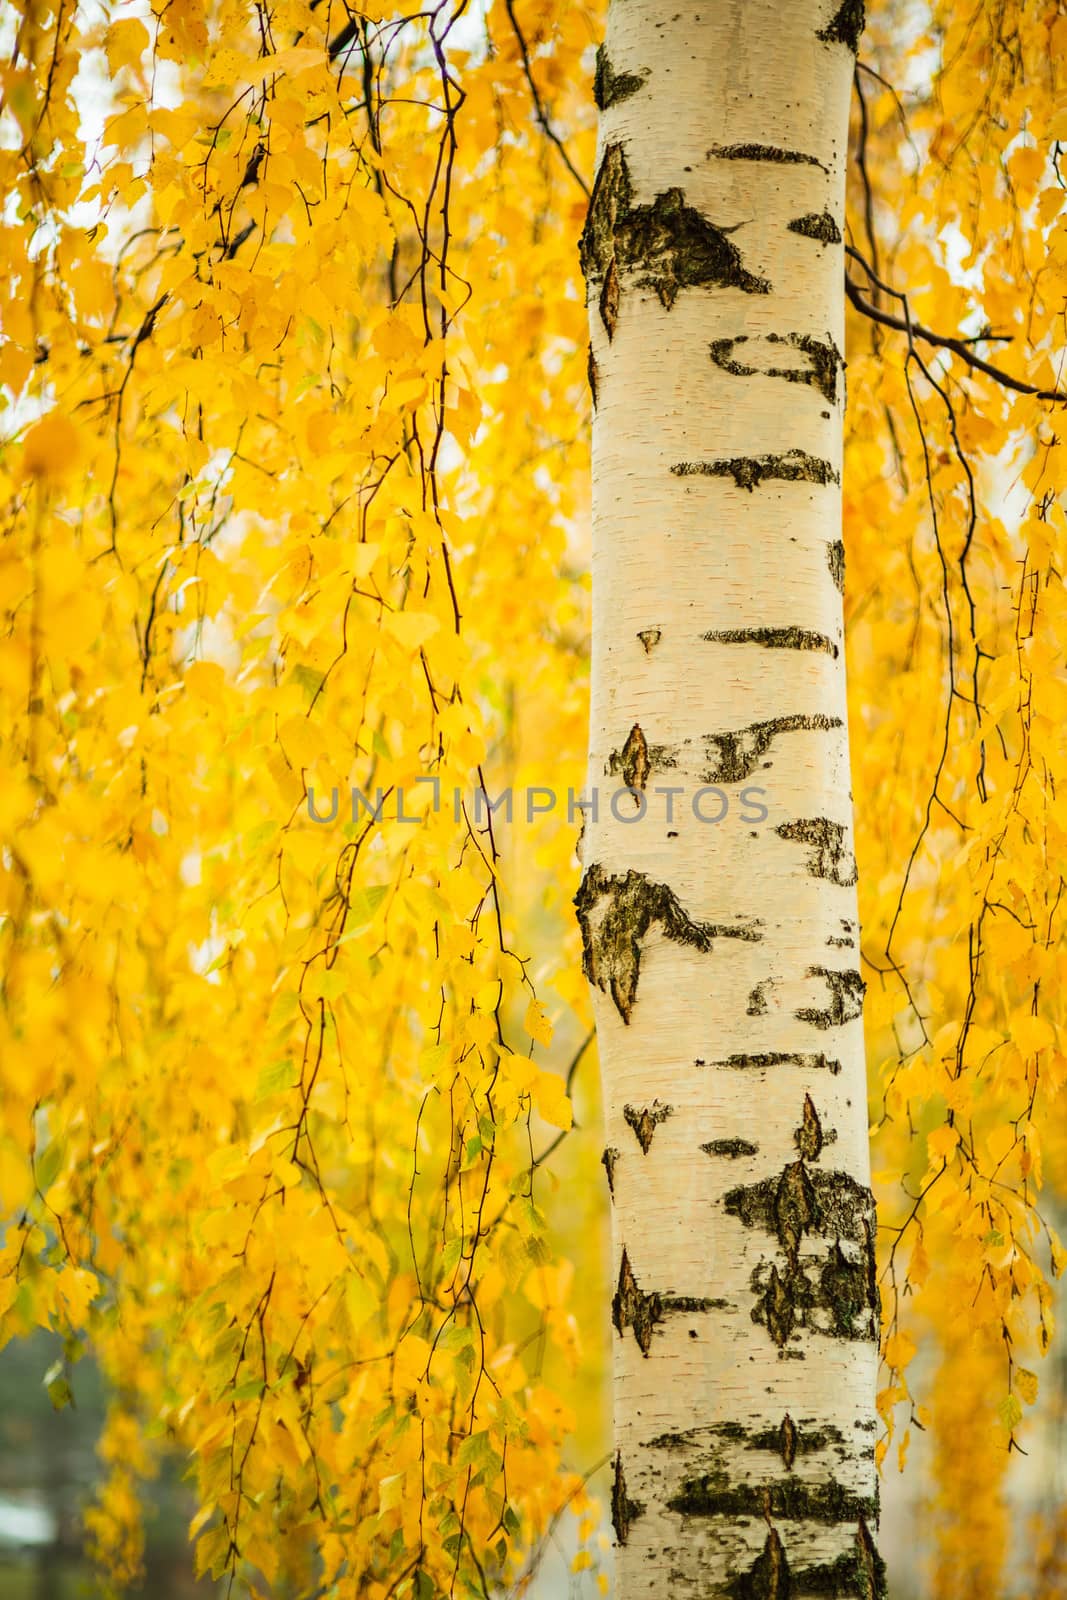 Birch trunk and vibrant yellow leaves by juhku